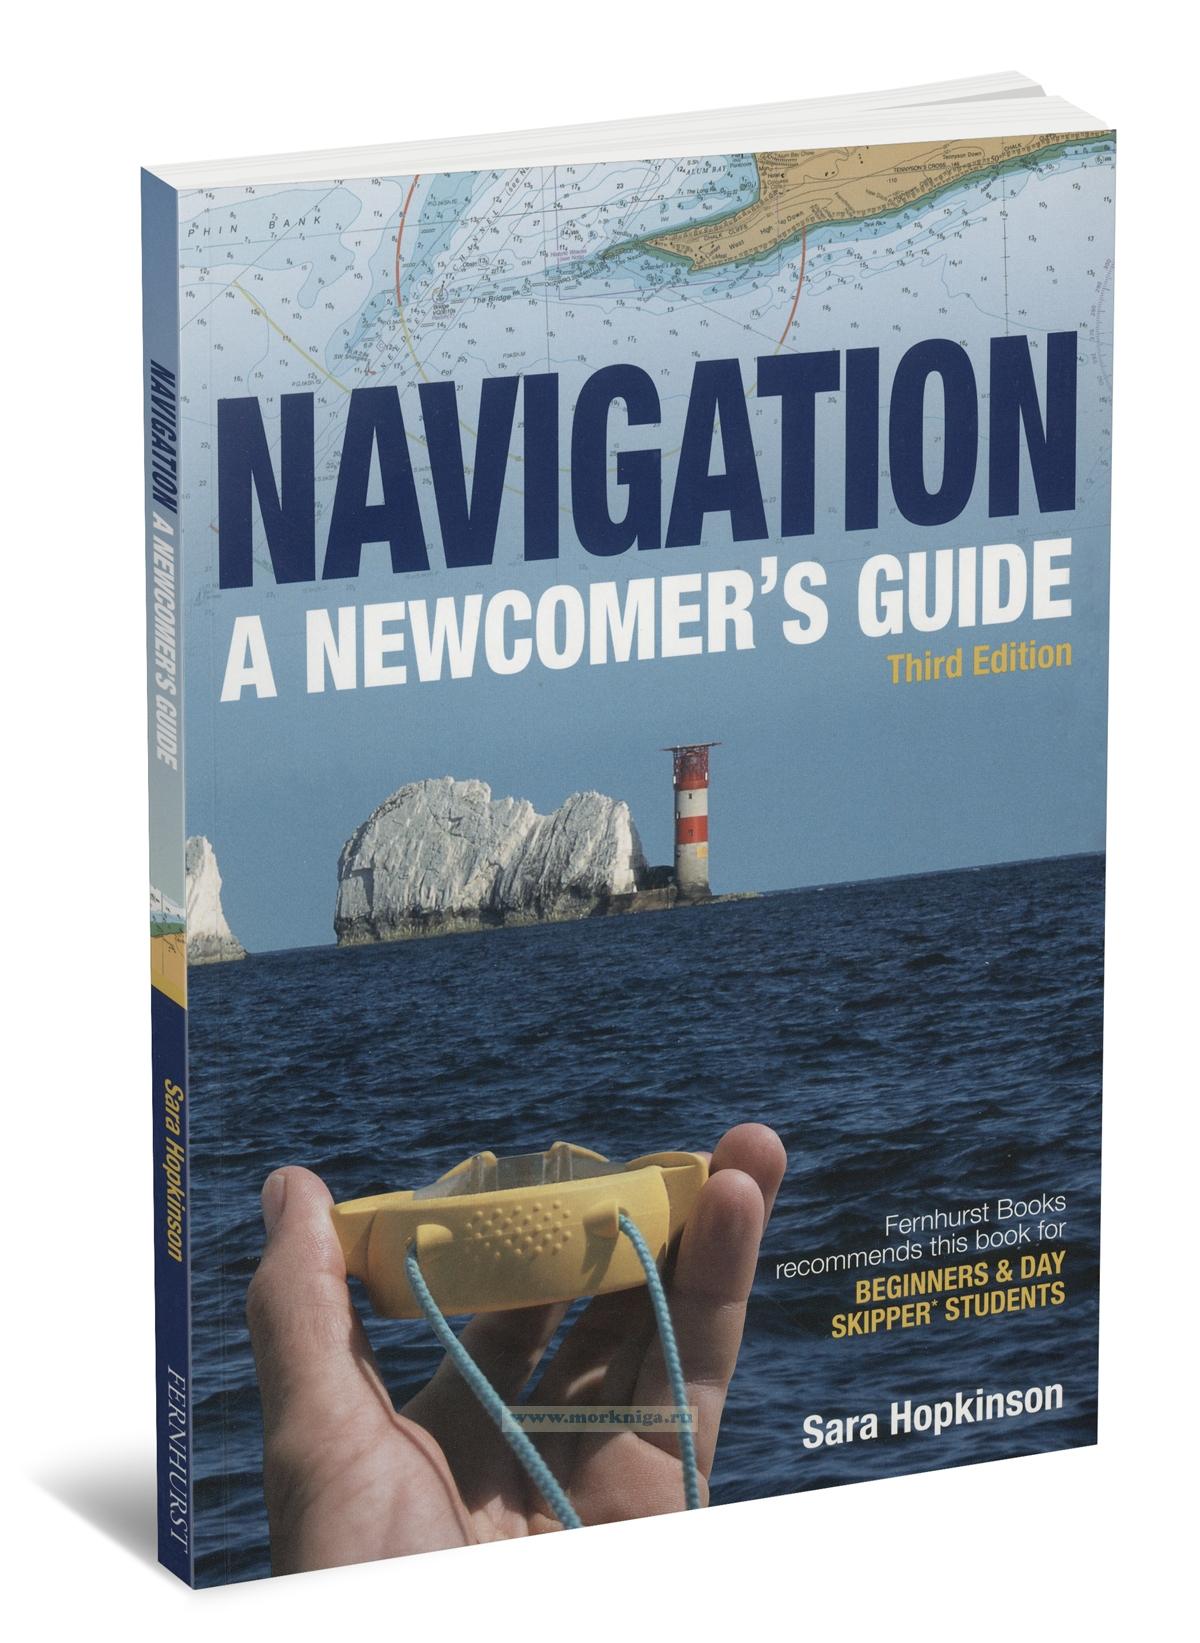 Navigation. A newcomer's guide